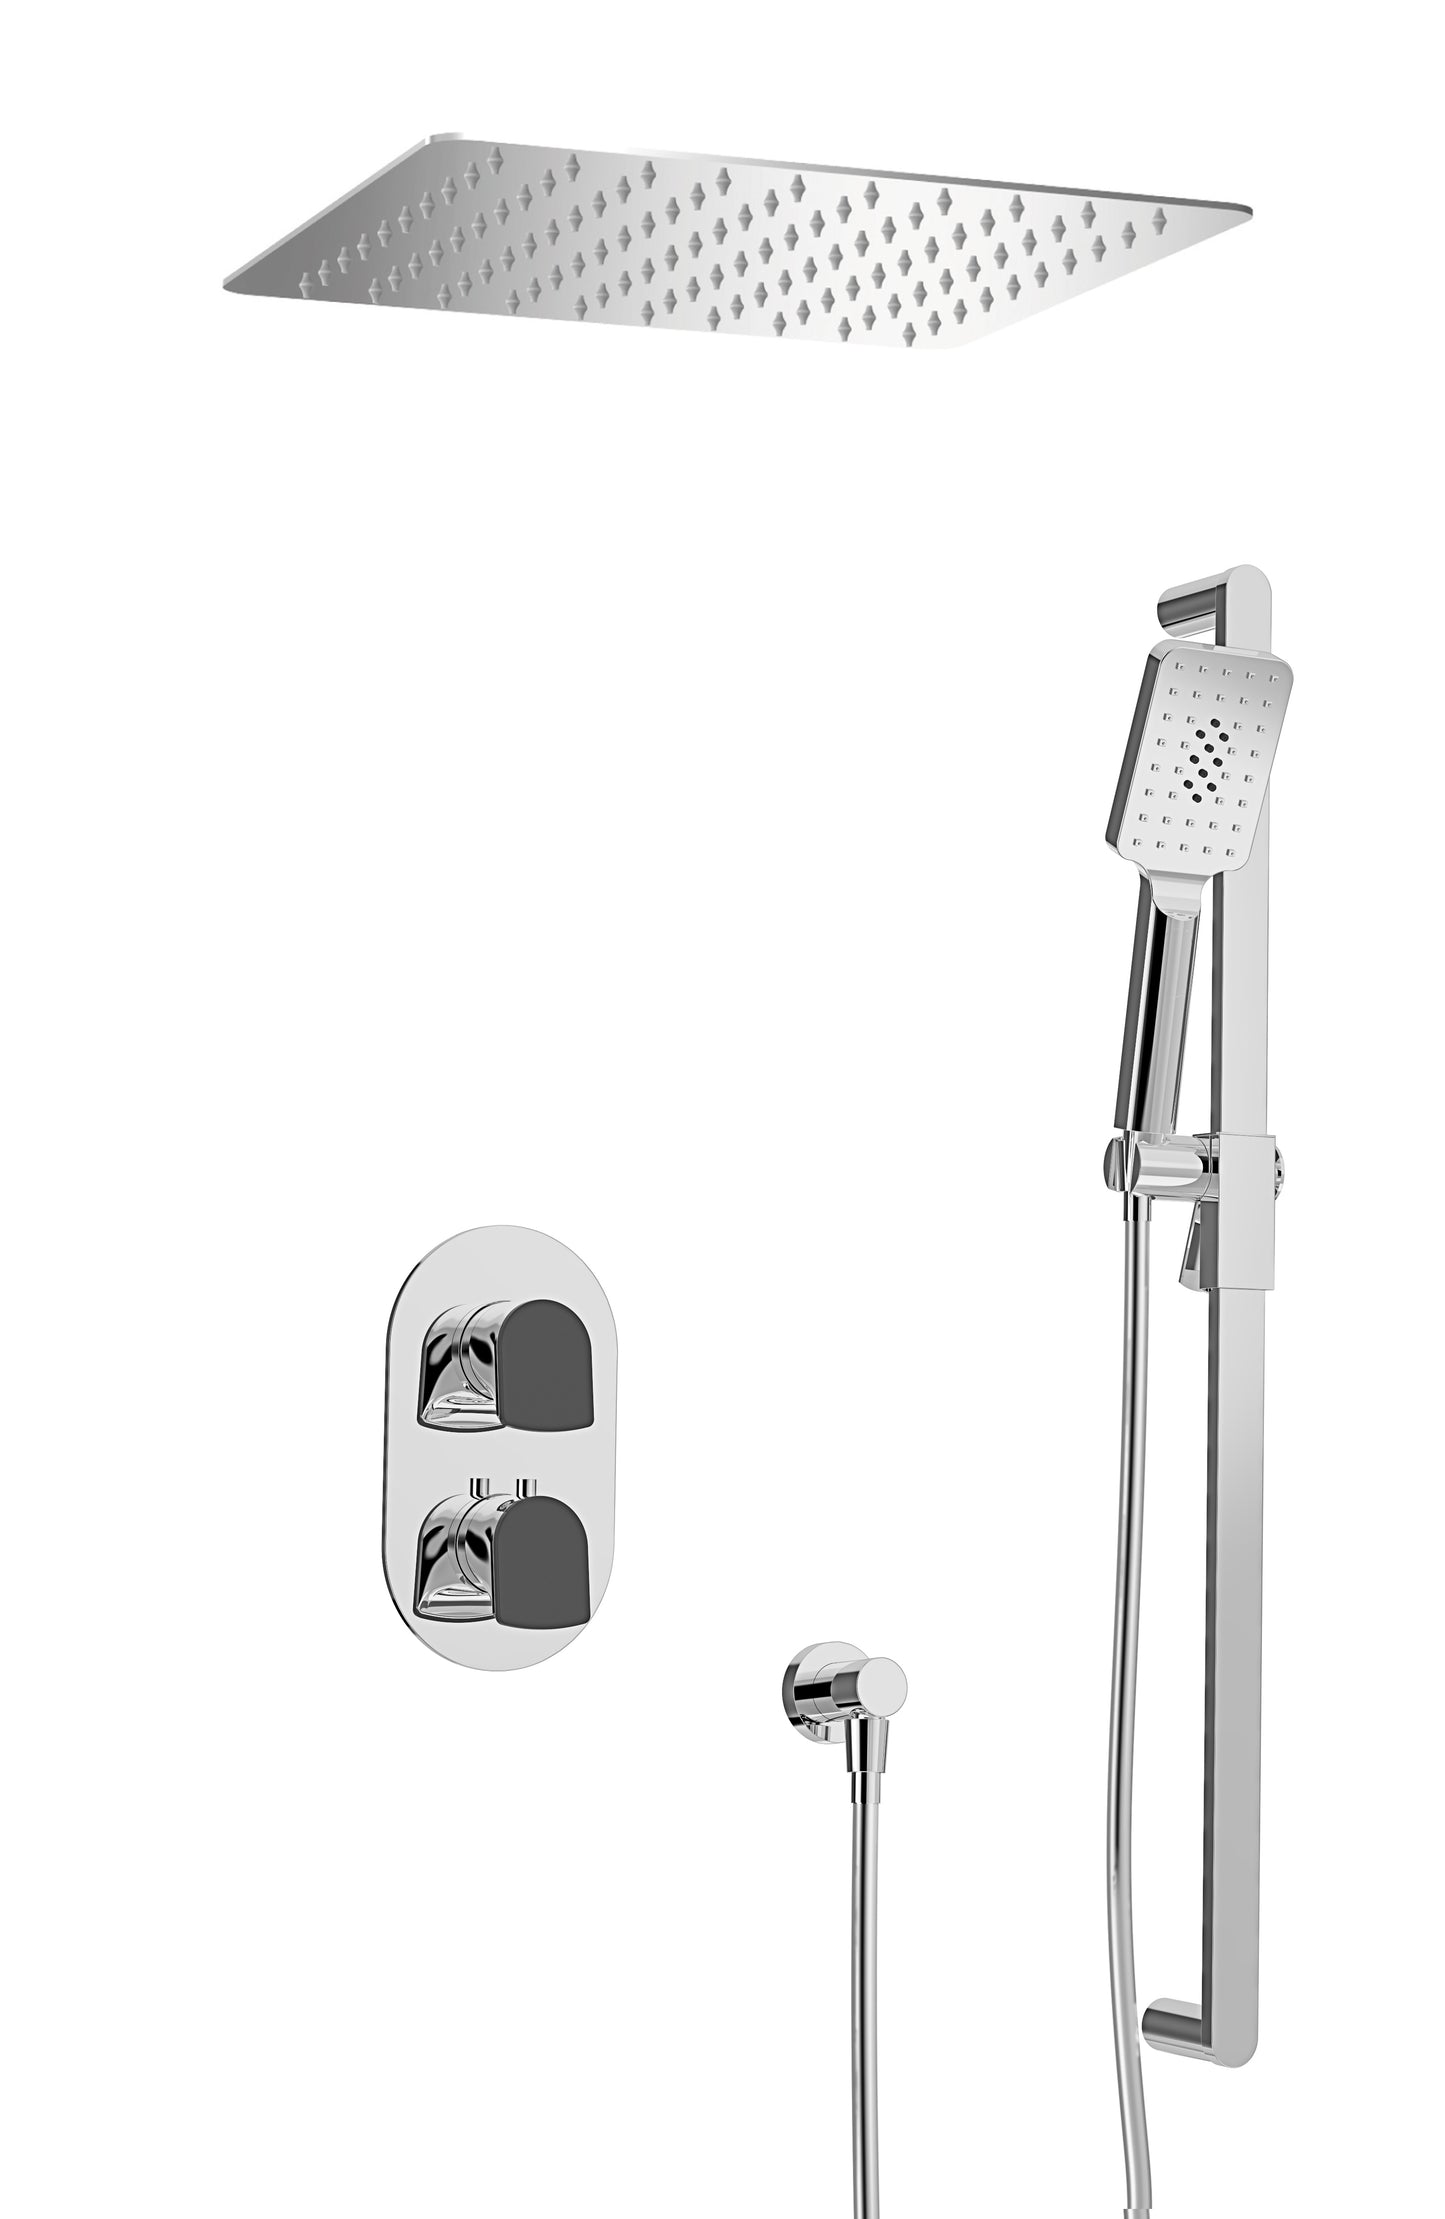 Baril Complete Thermostatic Pressure Balanced Shower Kit (ACCENT B56 4246)